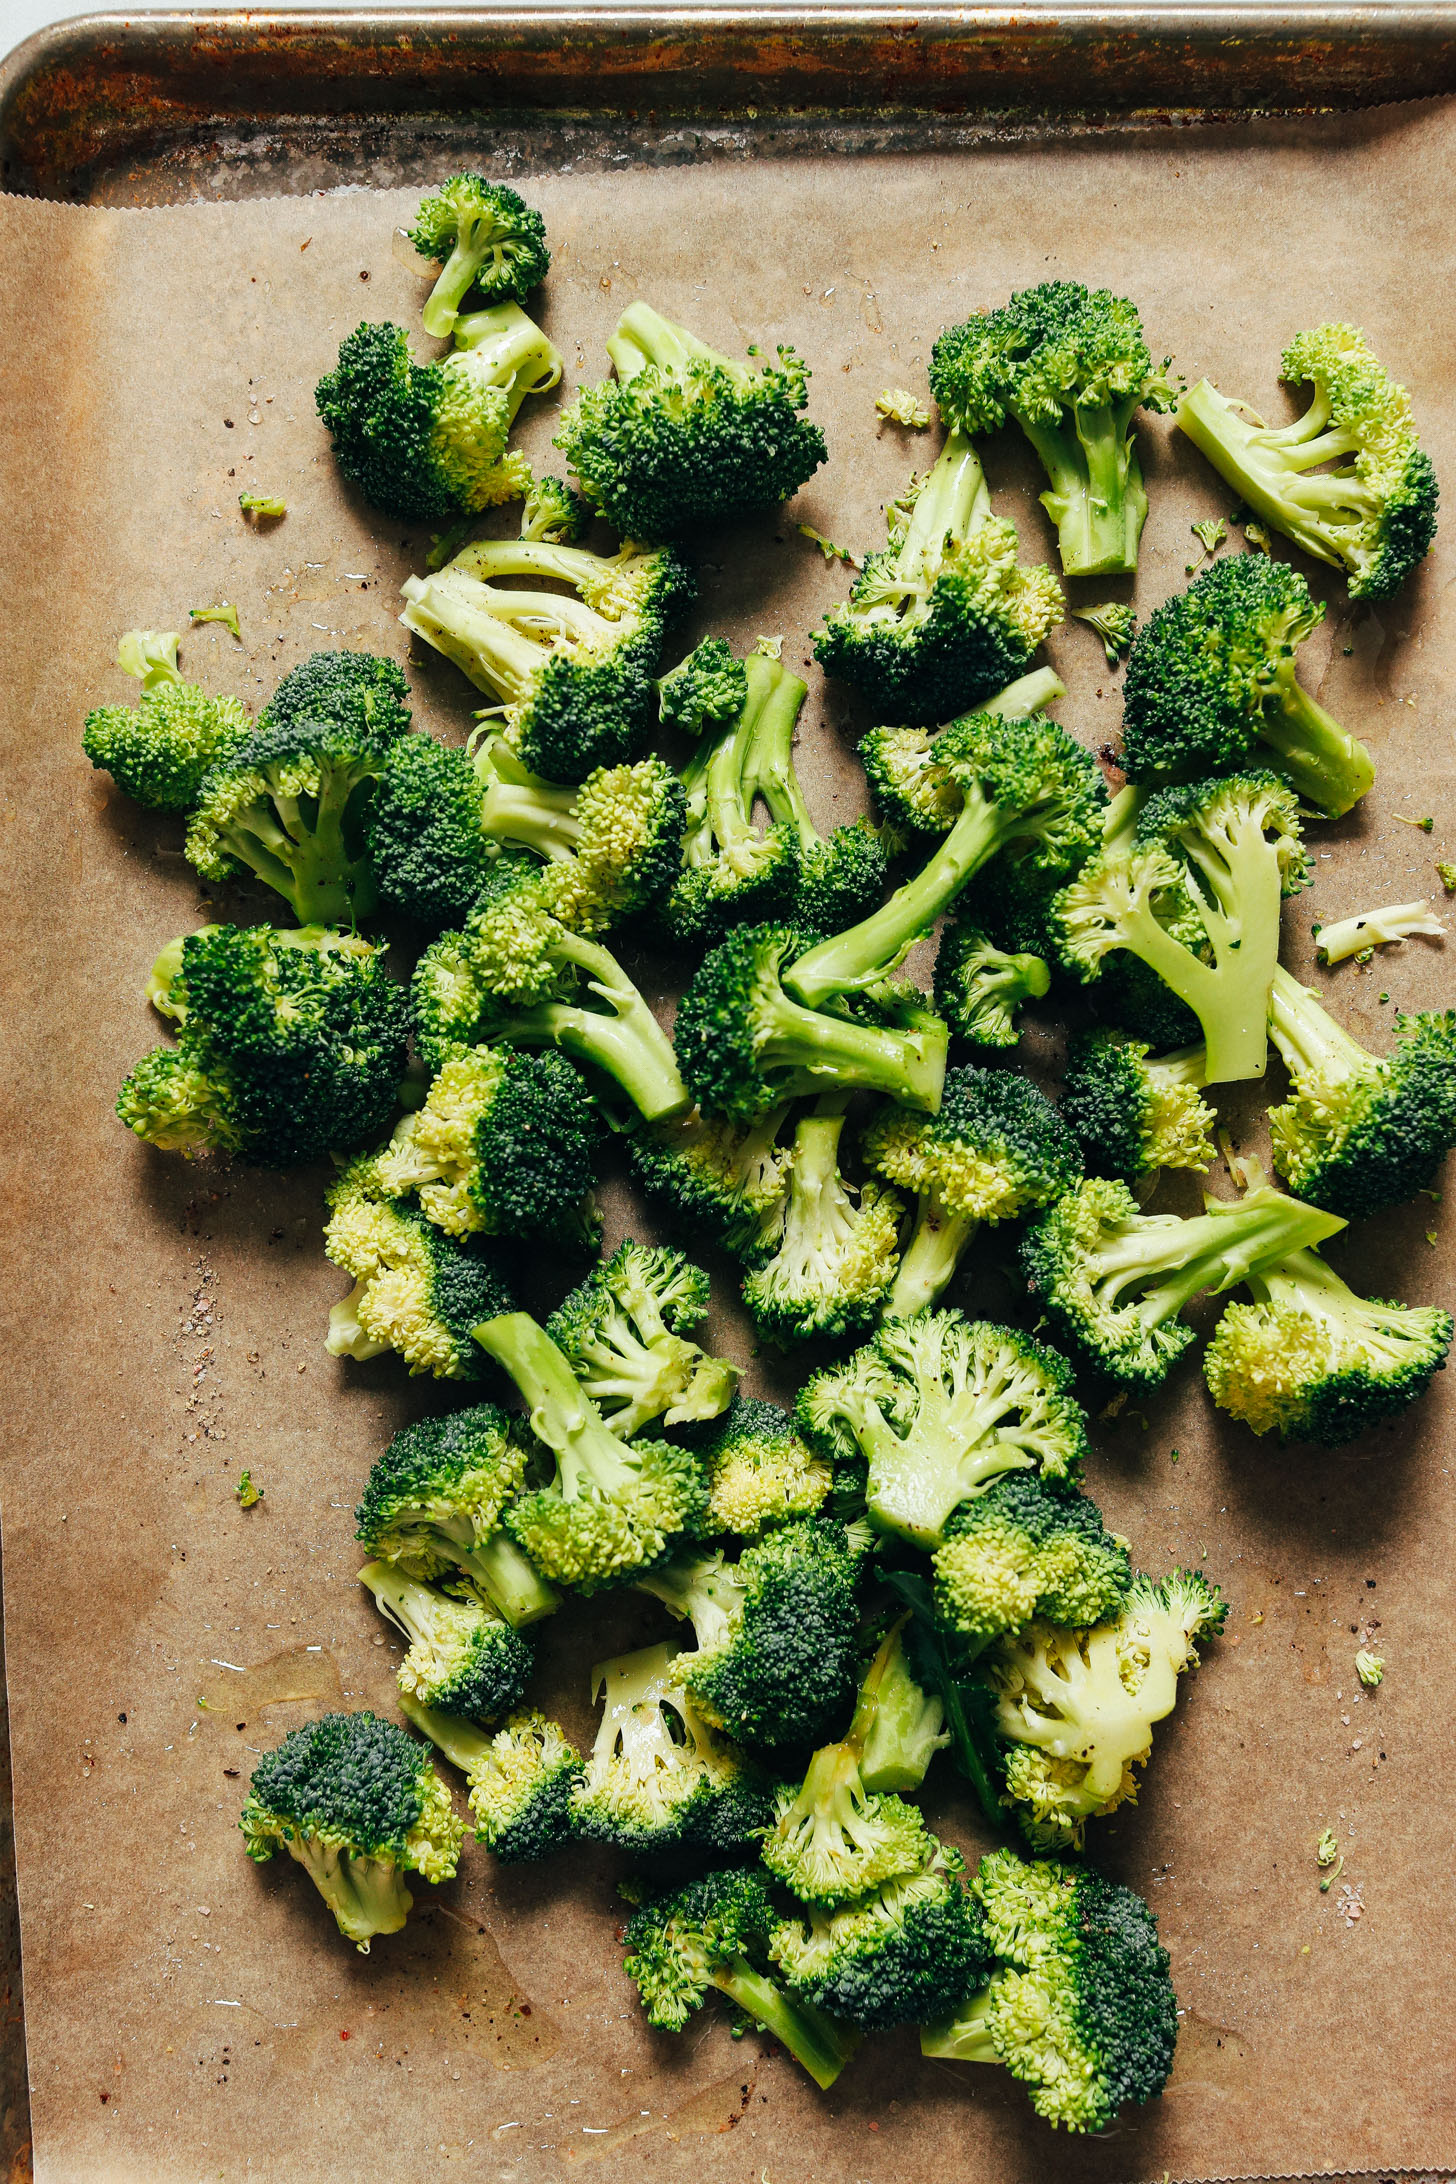 Broccoli on a parchment-lined baking sheet for making our Roasted Broccoli & Pesto Pasta Salad recipe